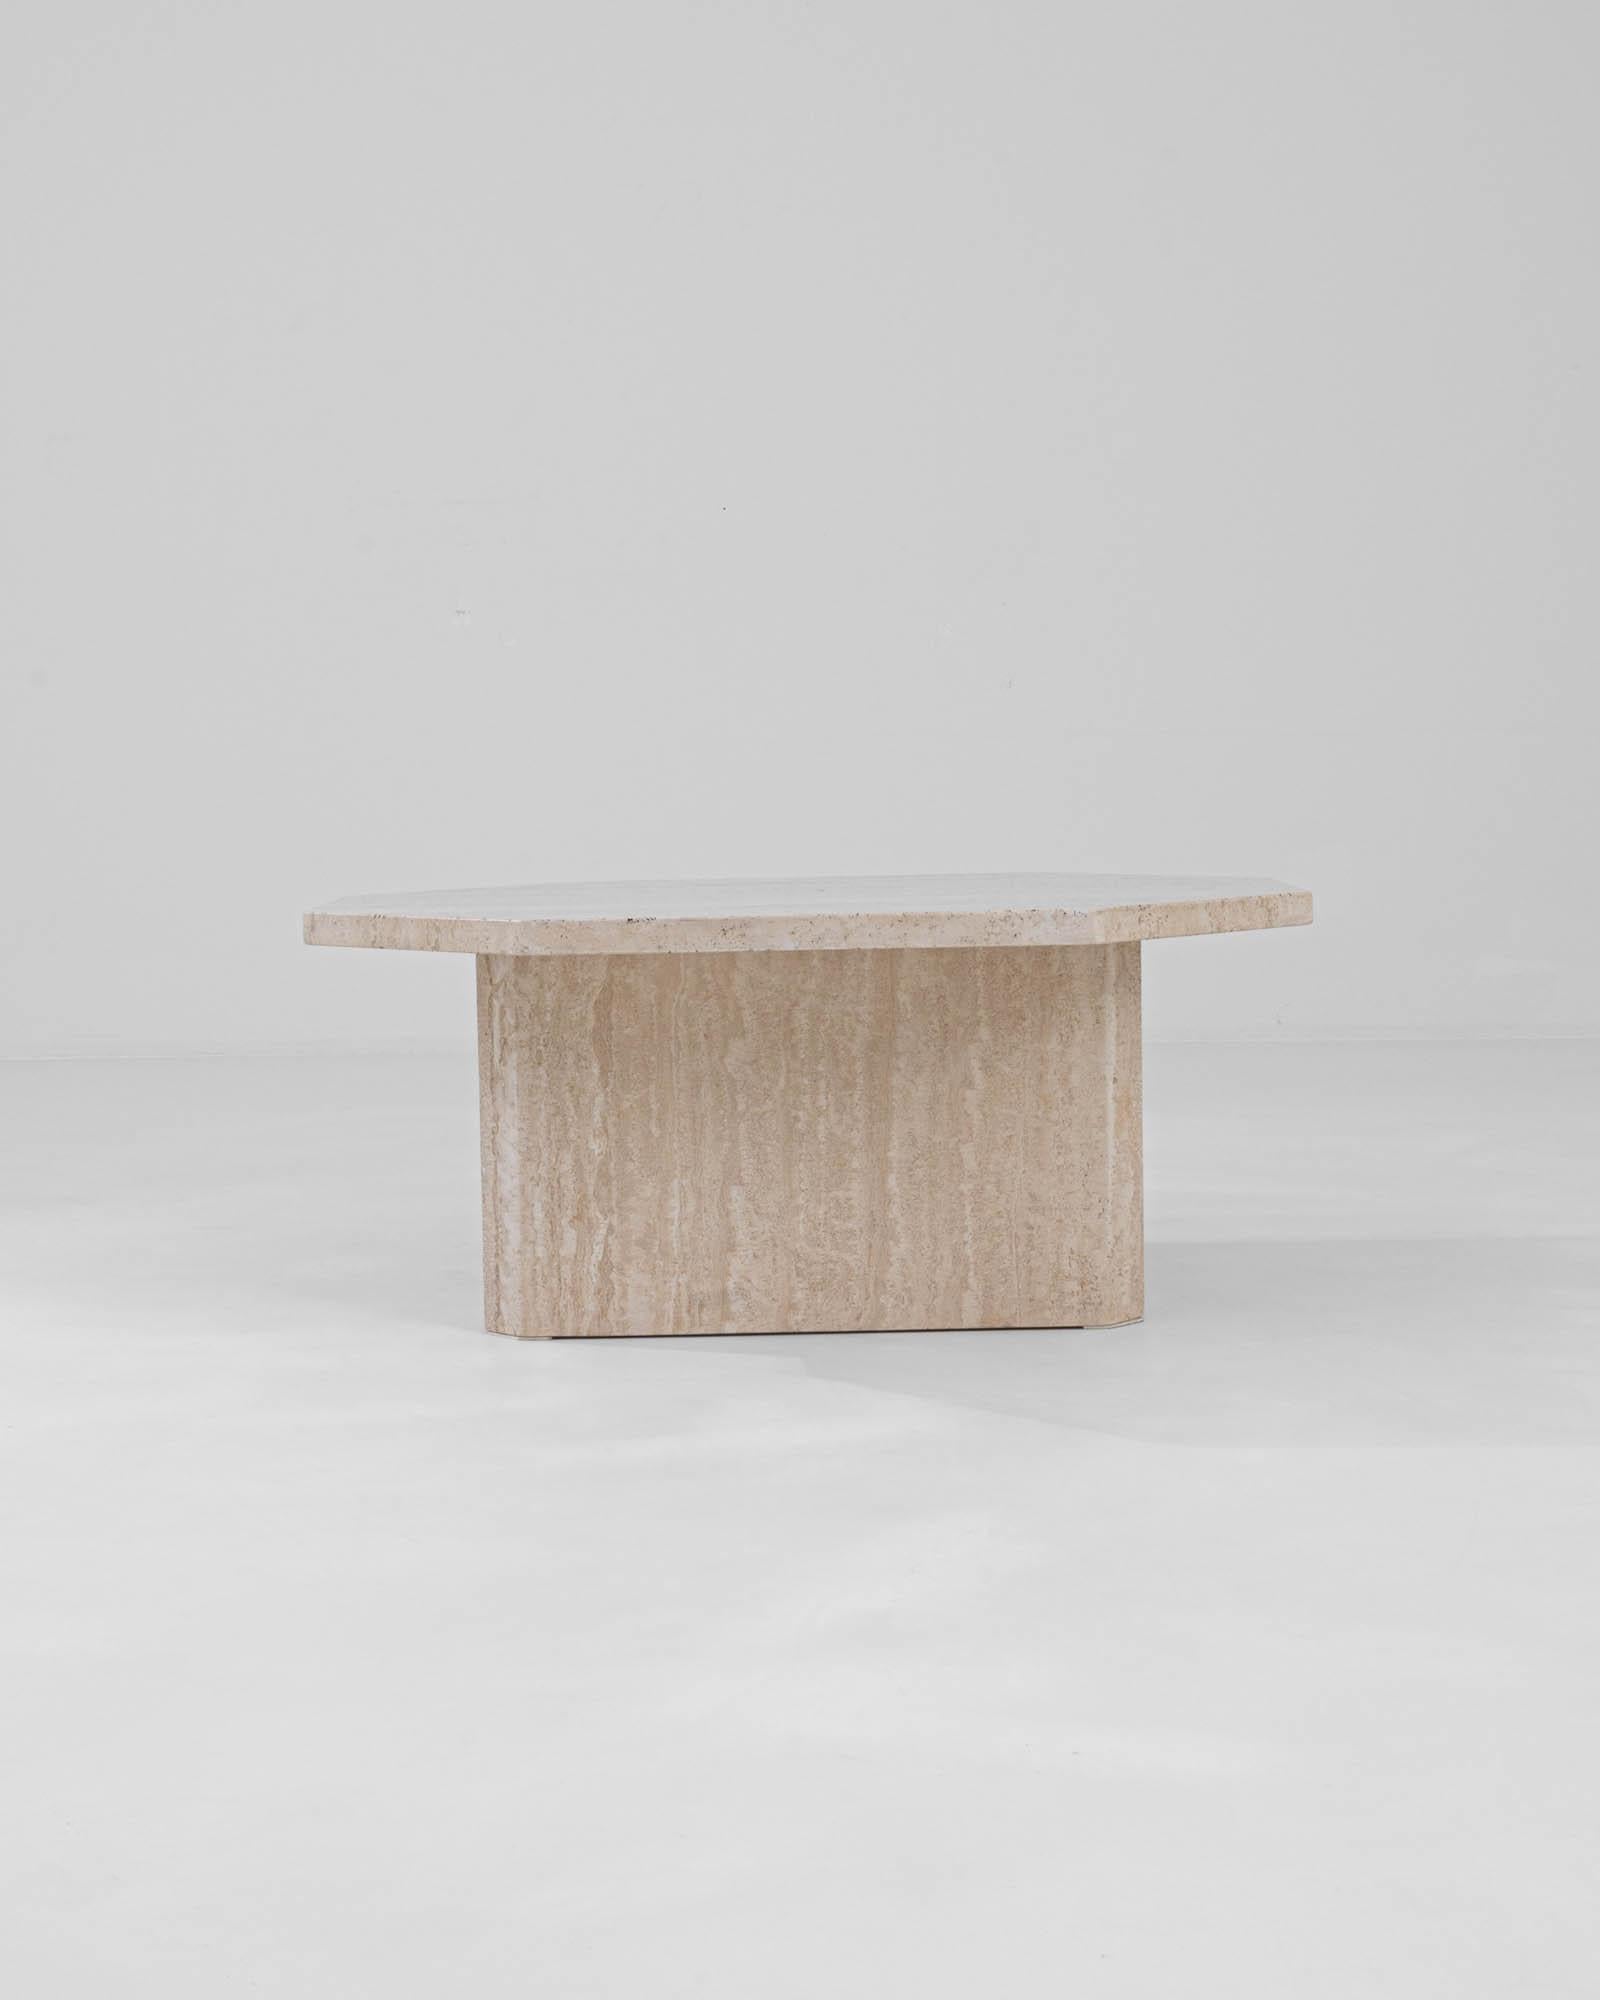 Introducing the 20th Century Italian Marble Coffee Table – a sculptural triumph that brings the luxury and timeless appeal of Italian design right into your living room. Crafted from a single block of marble, this table epitomizes the minimalist